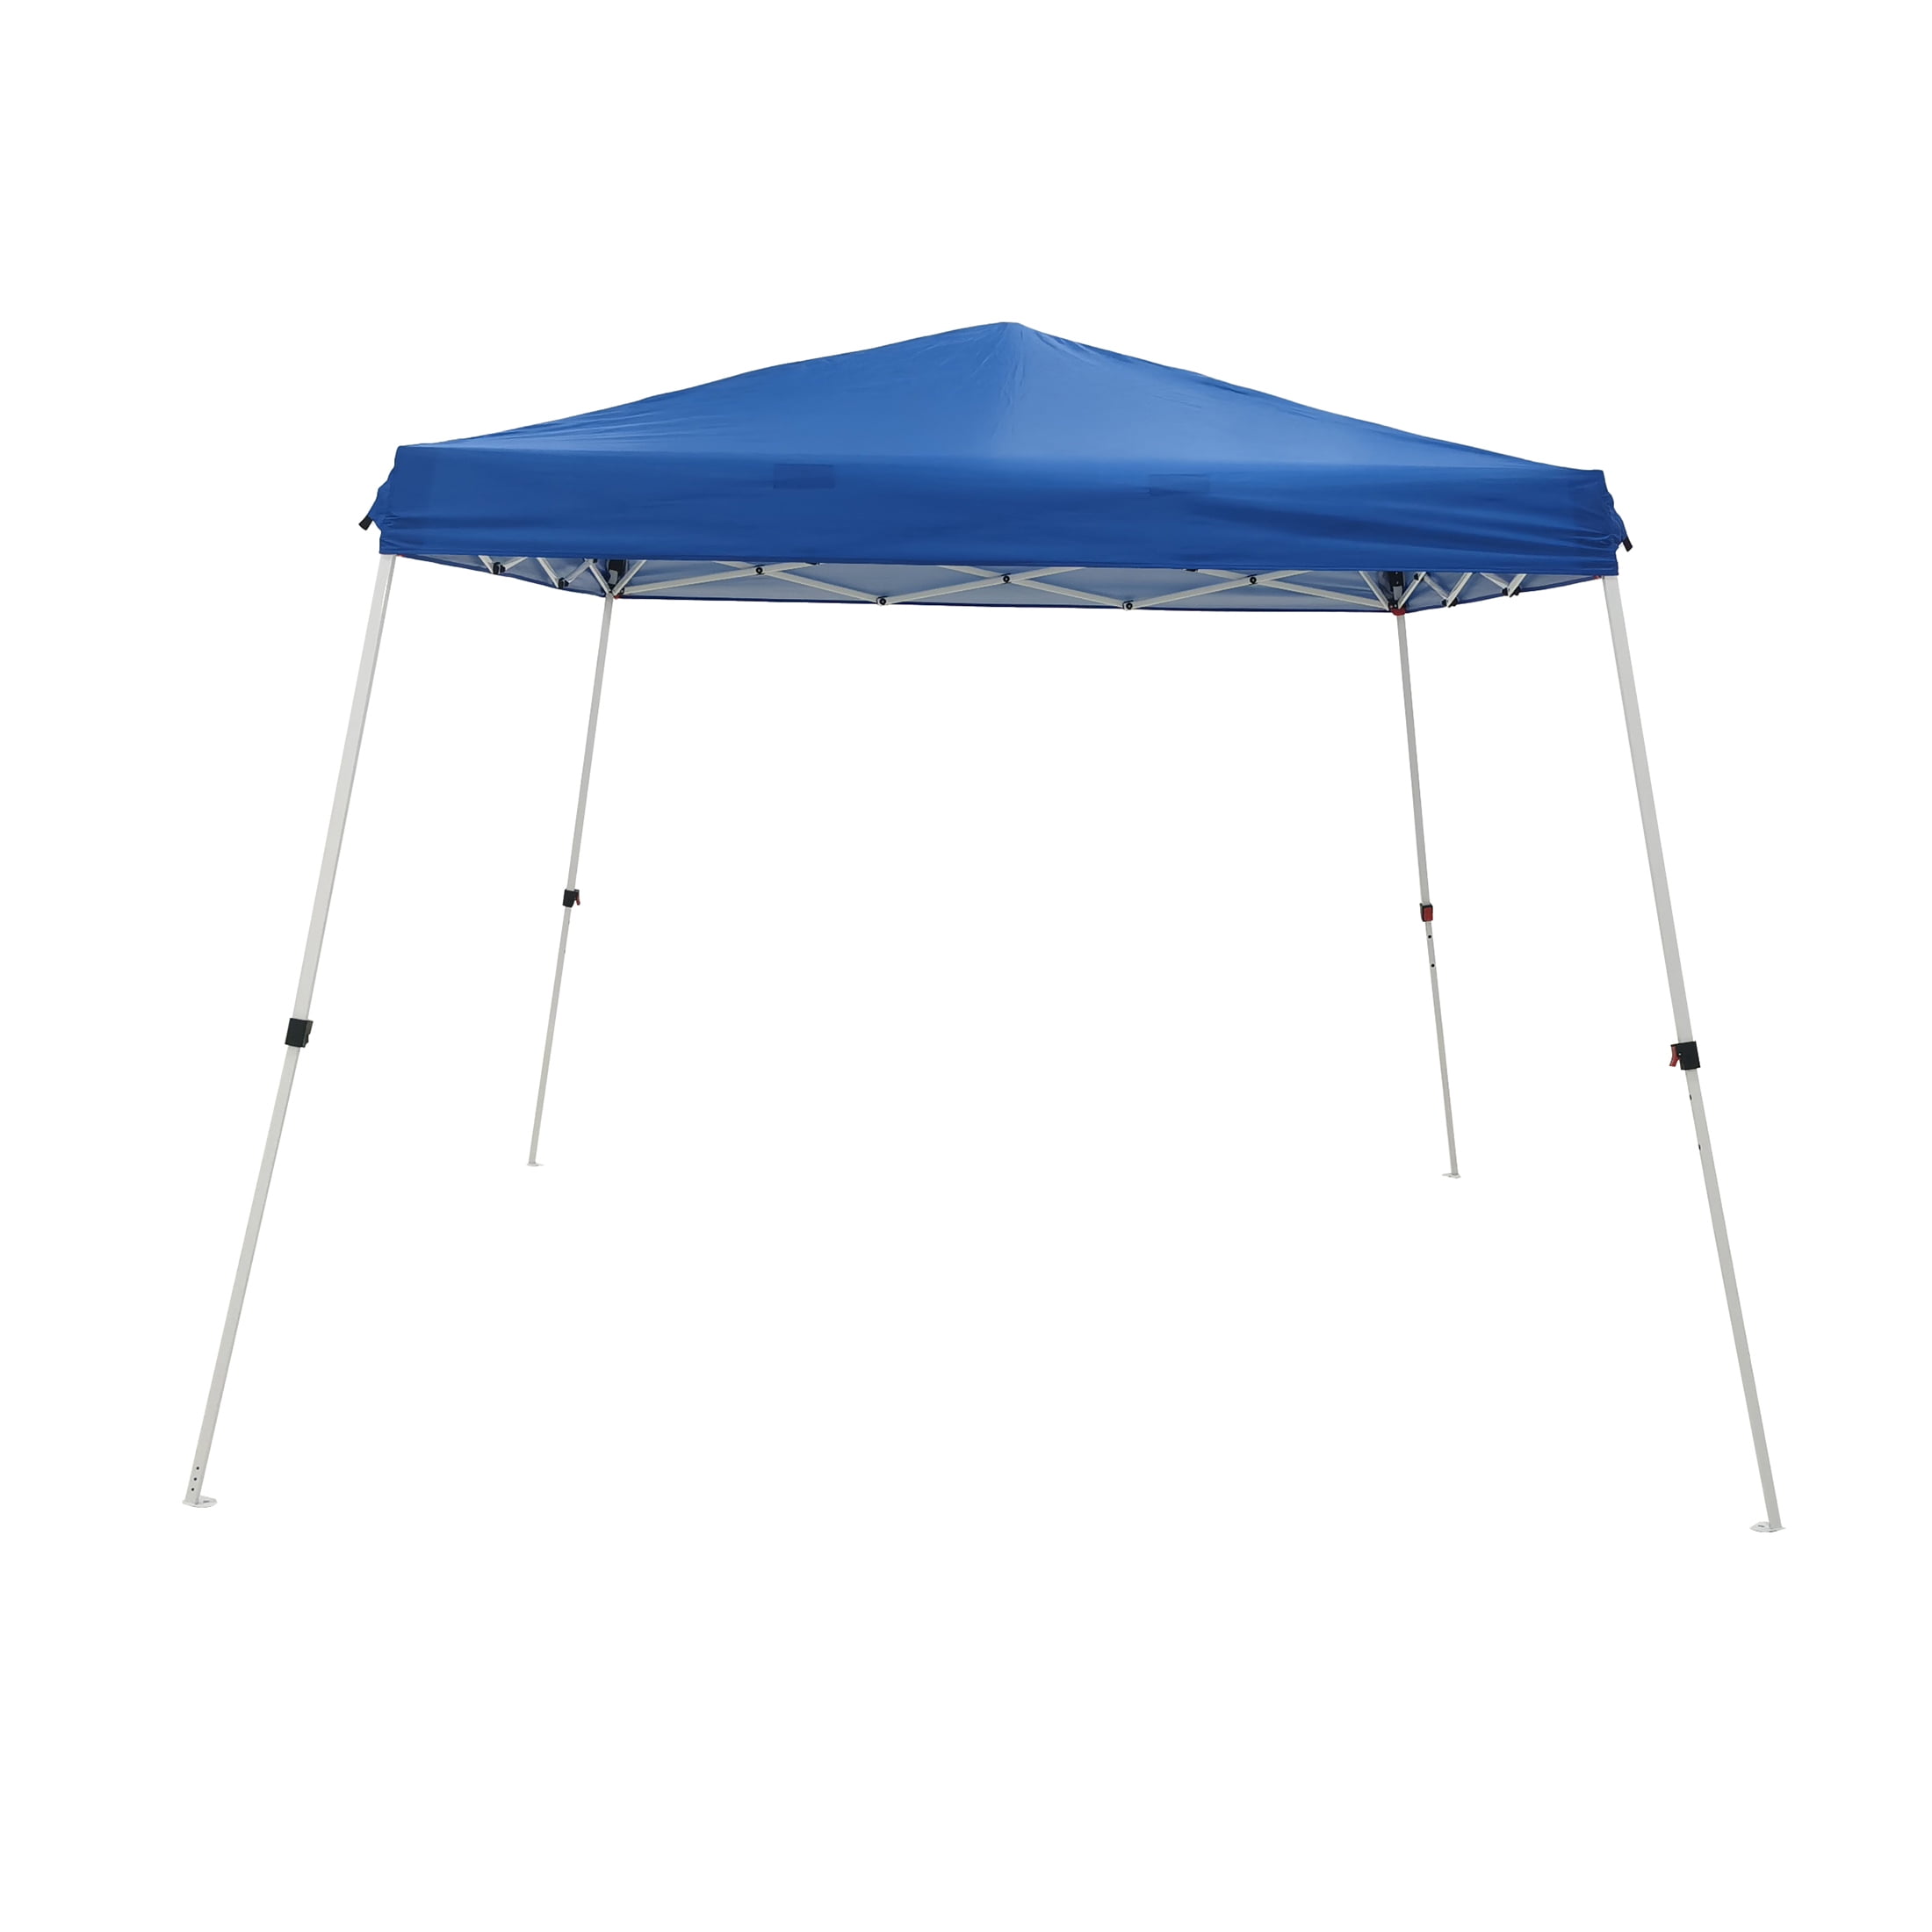 10'x10' Instant Slant Leg Canopy Blue Outdoor Event Camp Tent Sun Shade Protect 